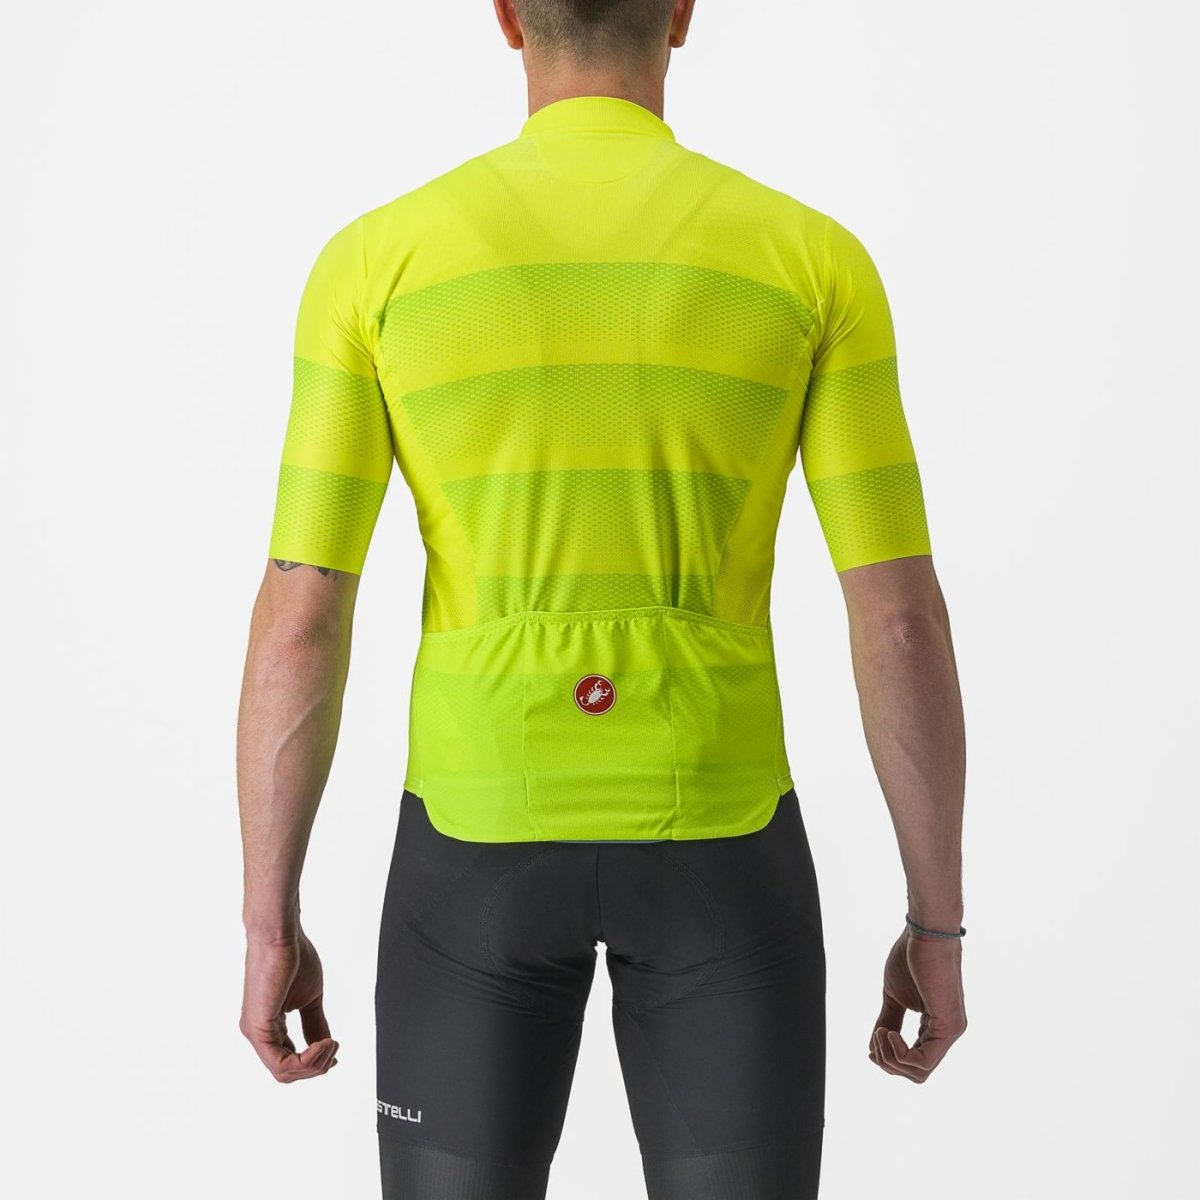 Castelli Livelli Men's Cycling Jersey (Yellow Fluo)